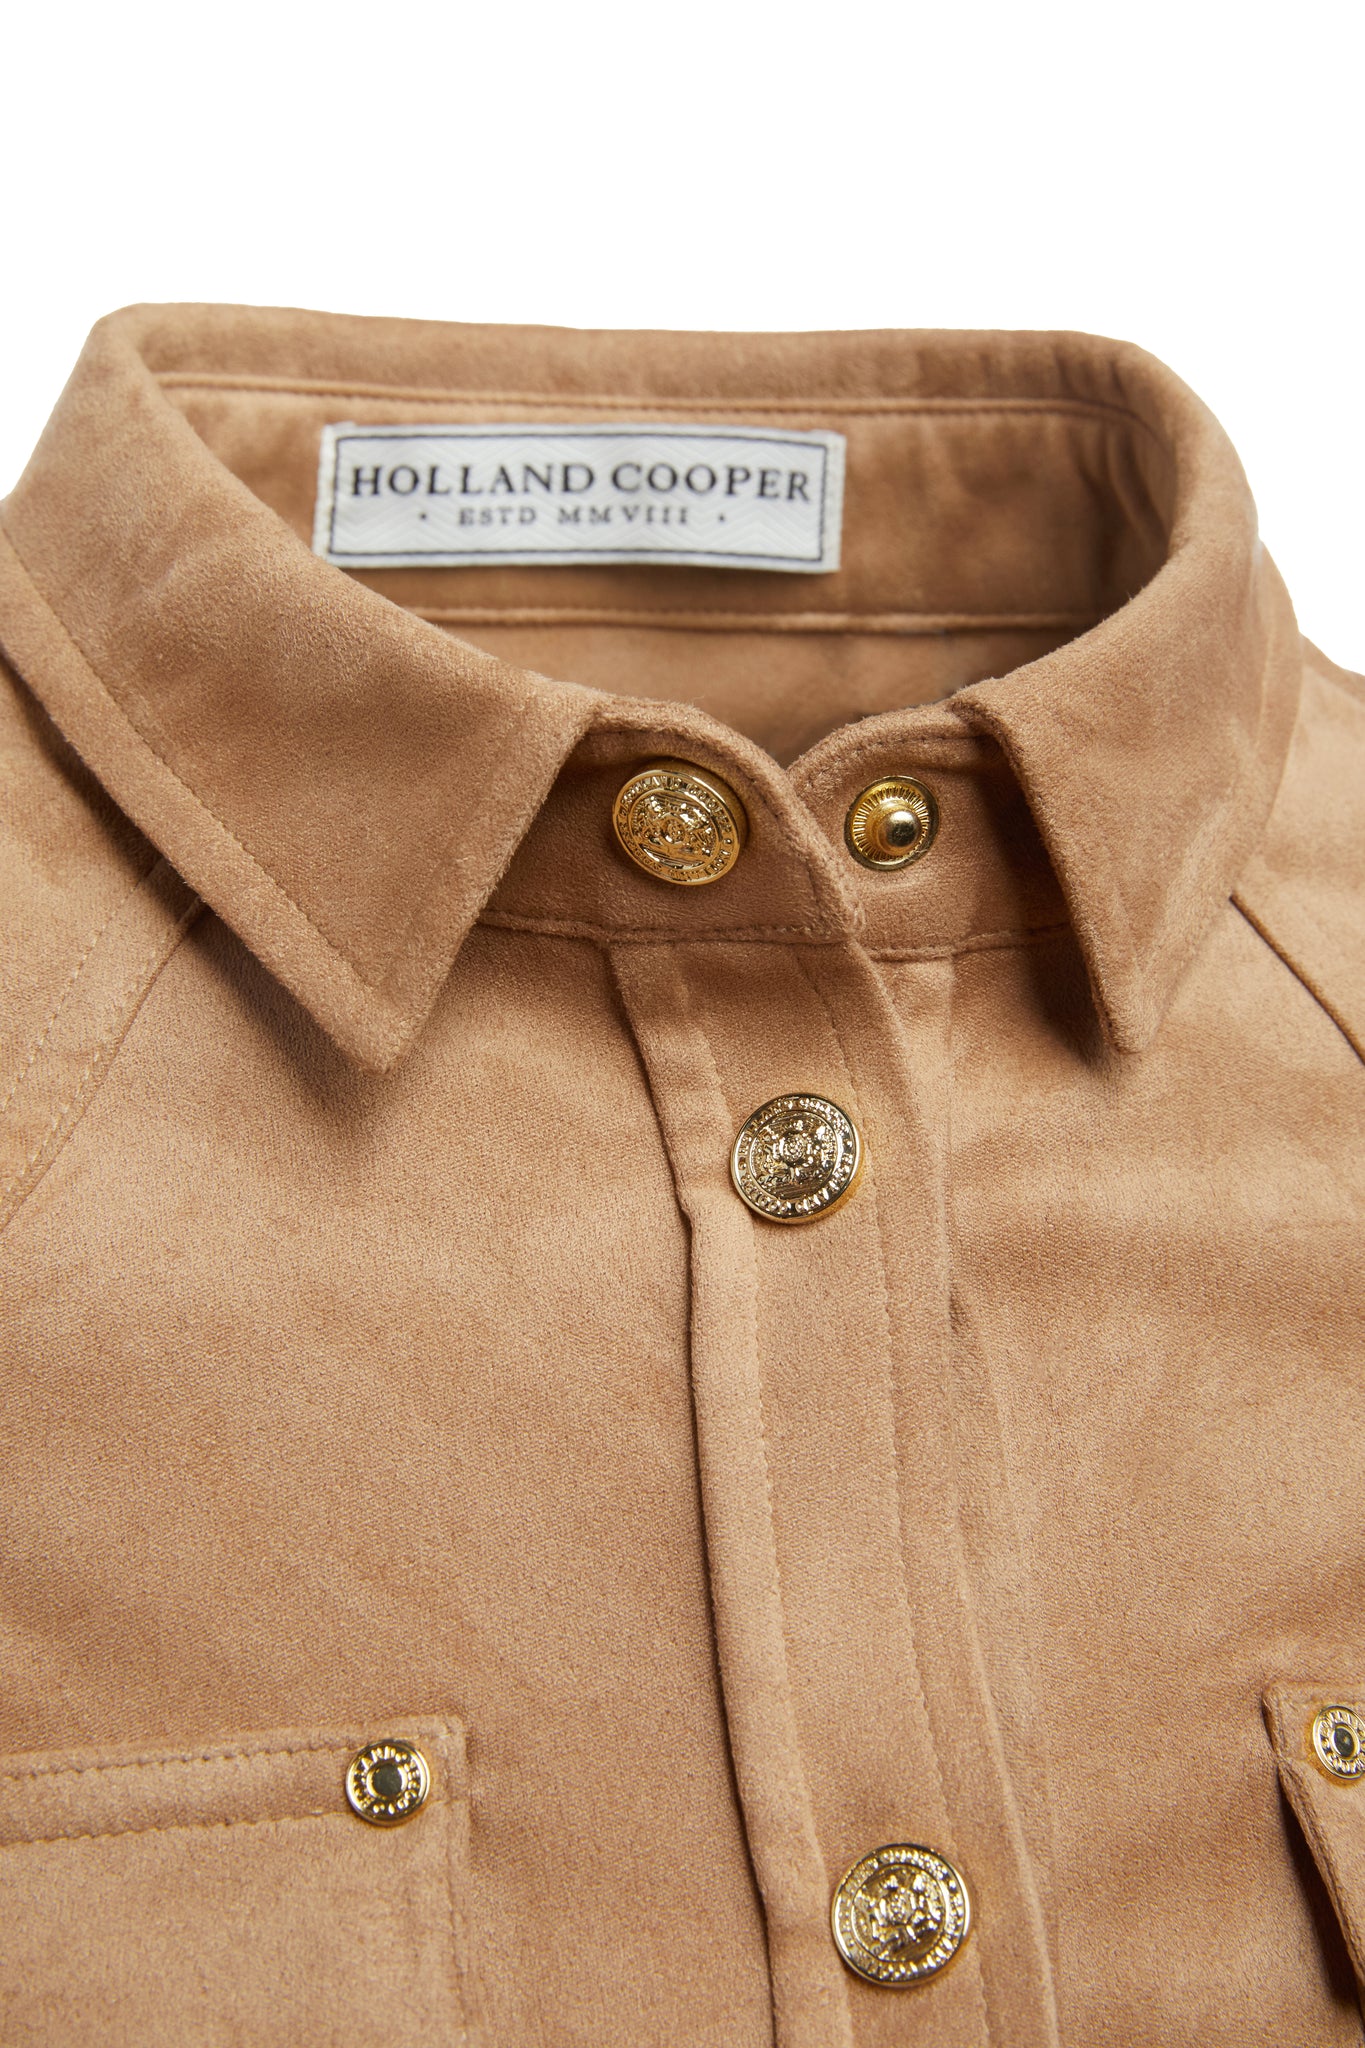 Western Suedette Shirt (Taupe)